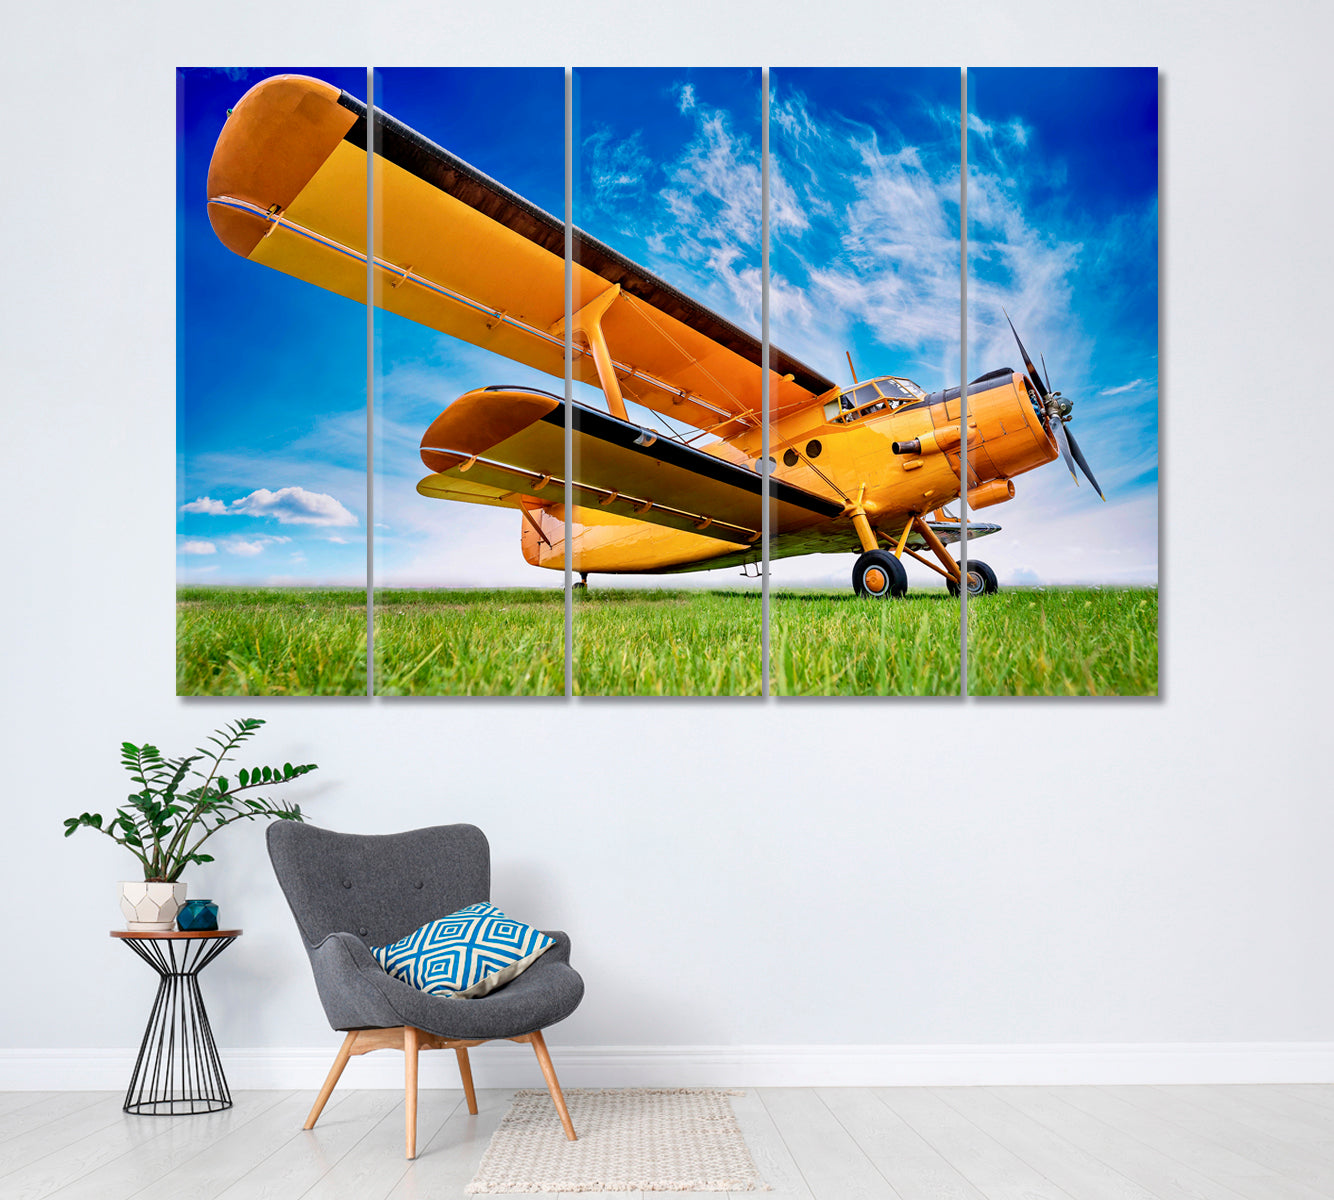 Old Yellow Biplane with Blue Sky Canvas Print ArtLexy 5 Panels 36"x24" inches 